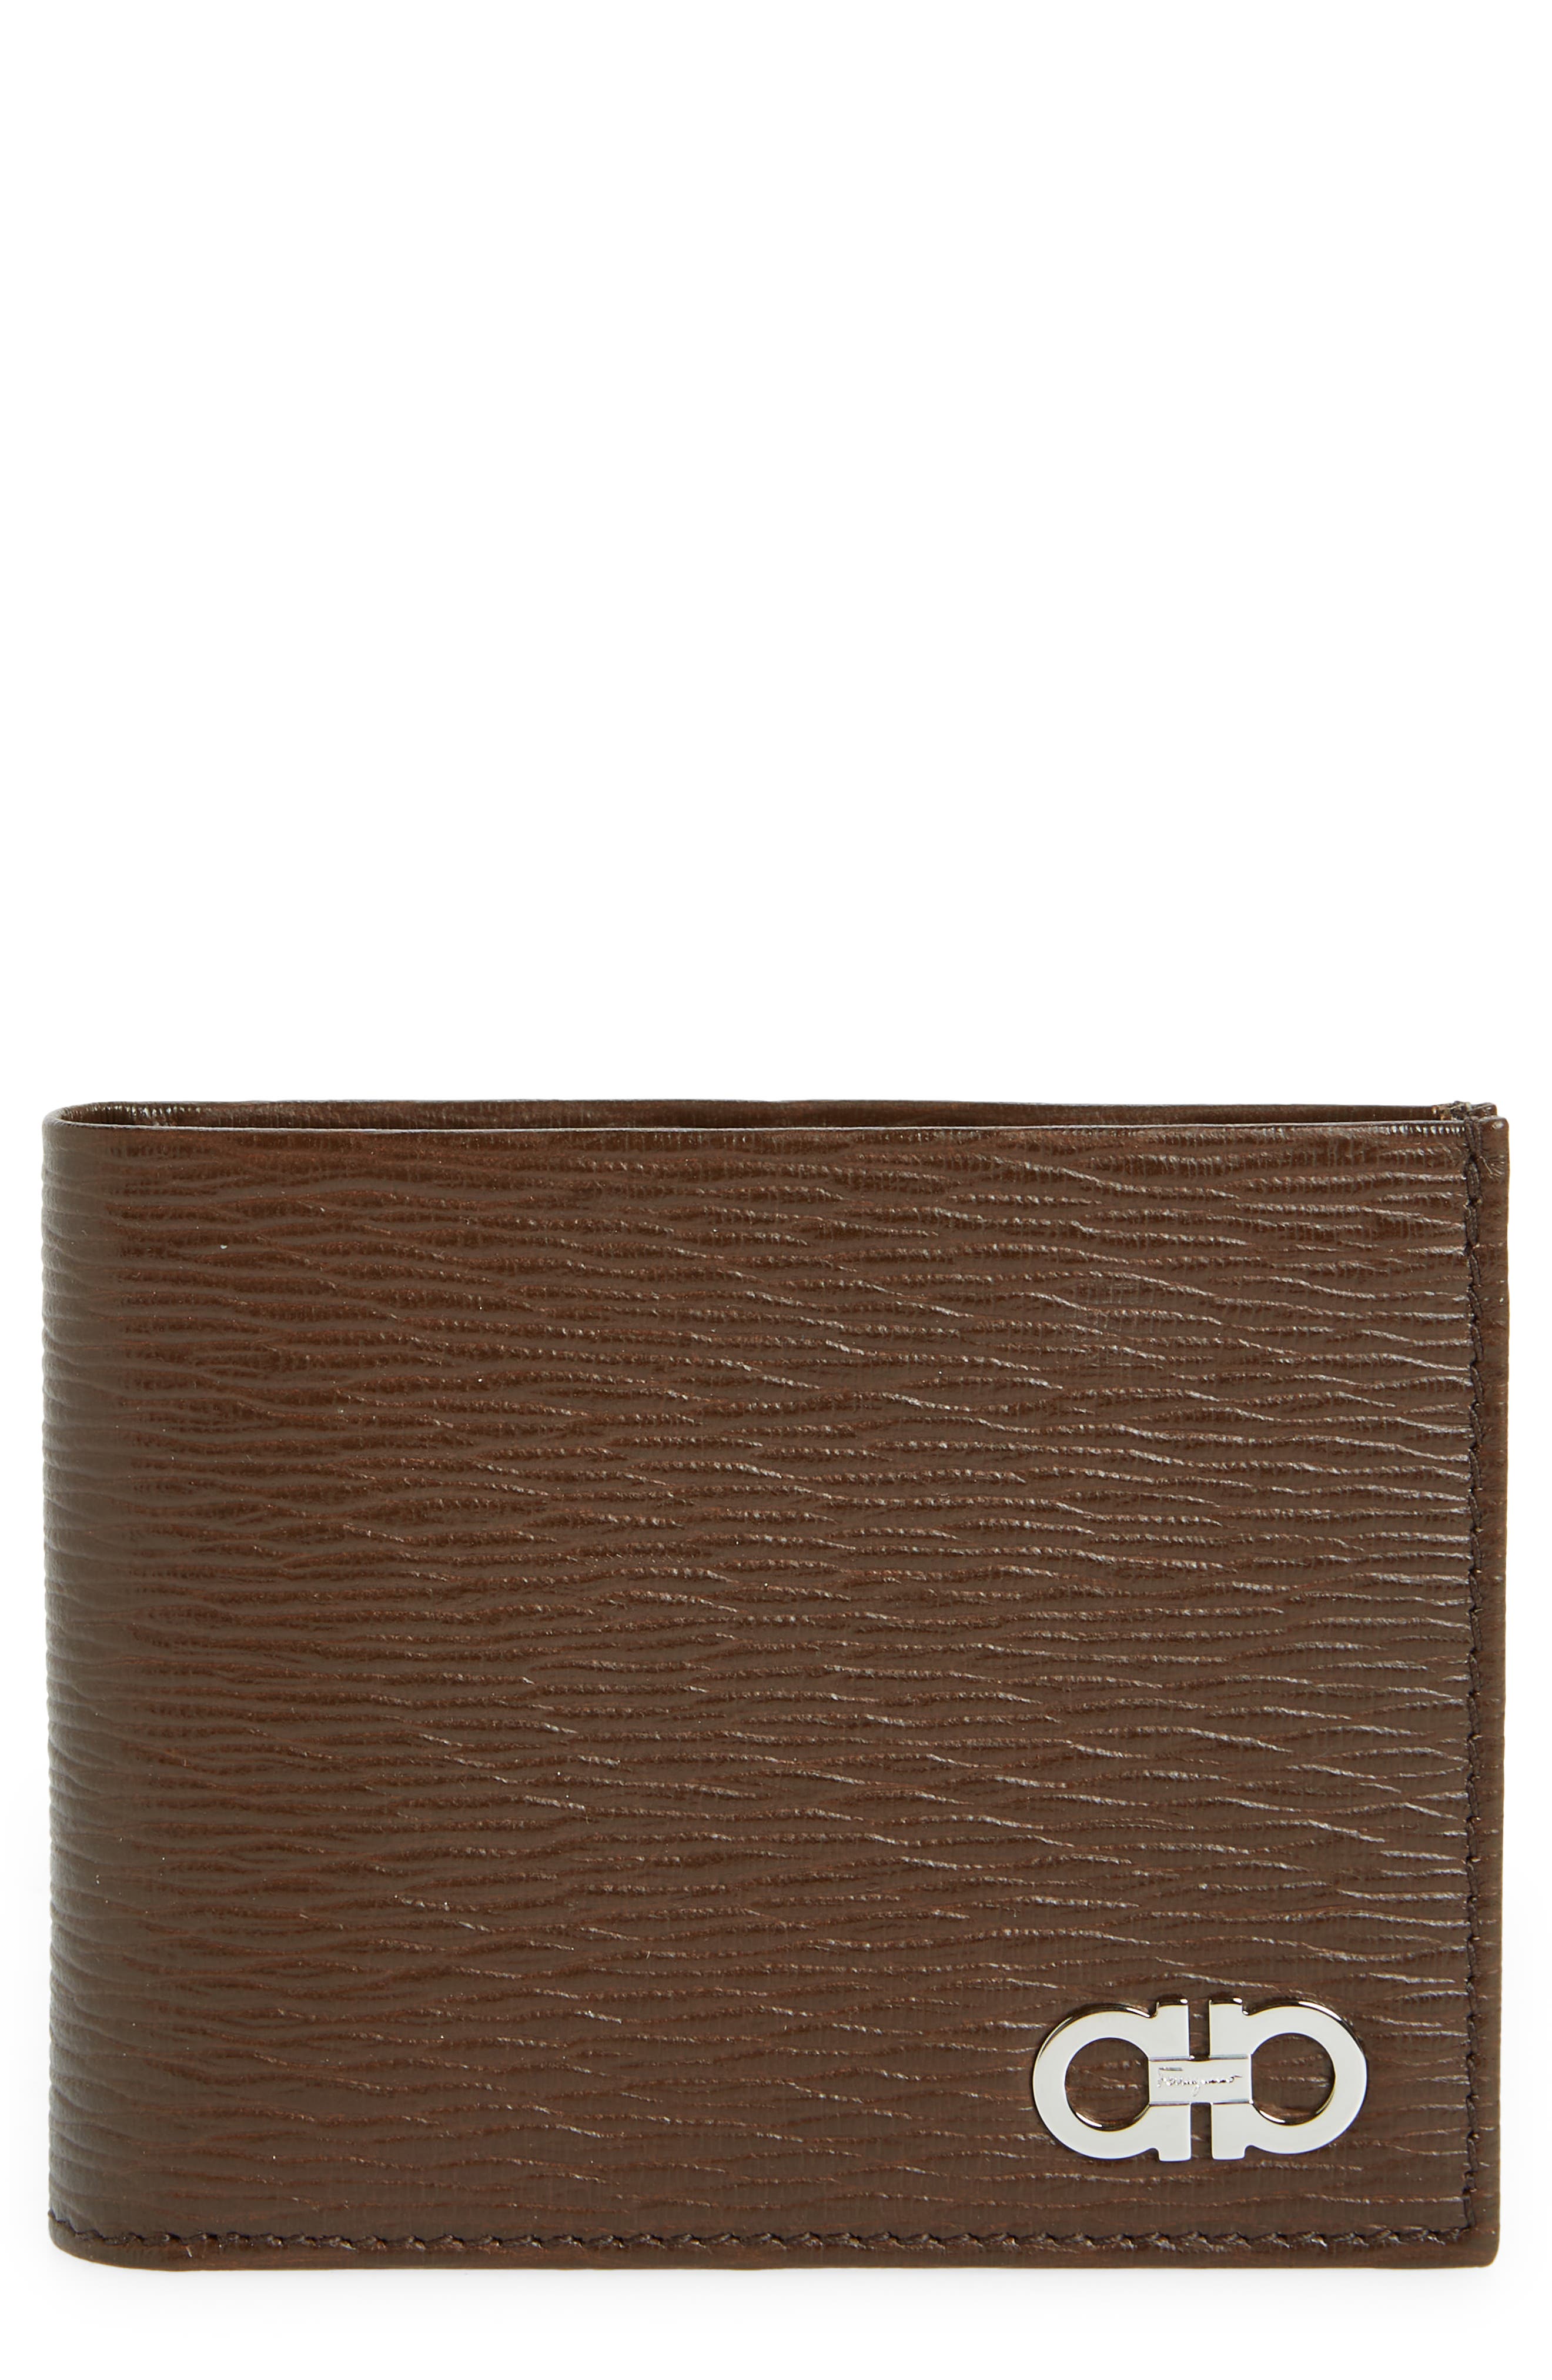 Ferragamo Gancini Bi-fold Wallet In Leather in Brown for Men Mens Accessories Wallets and cardholders 